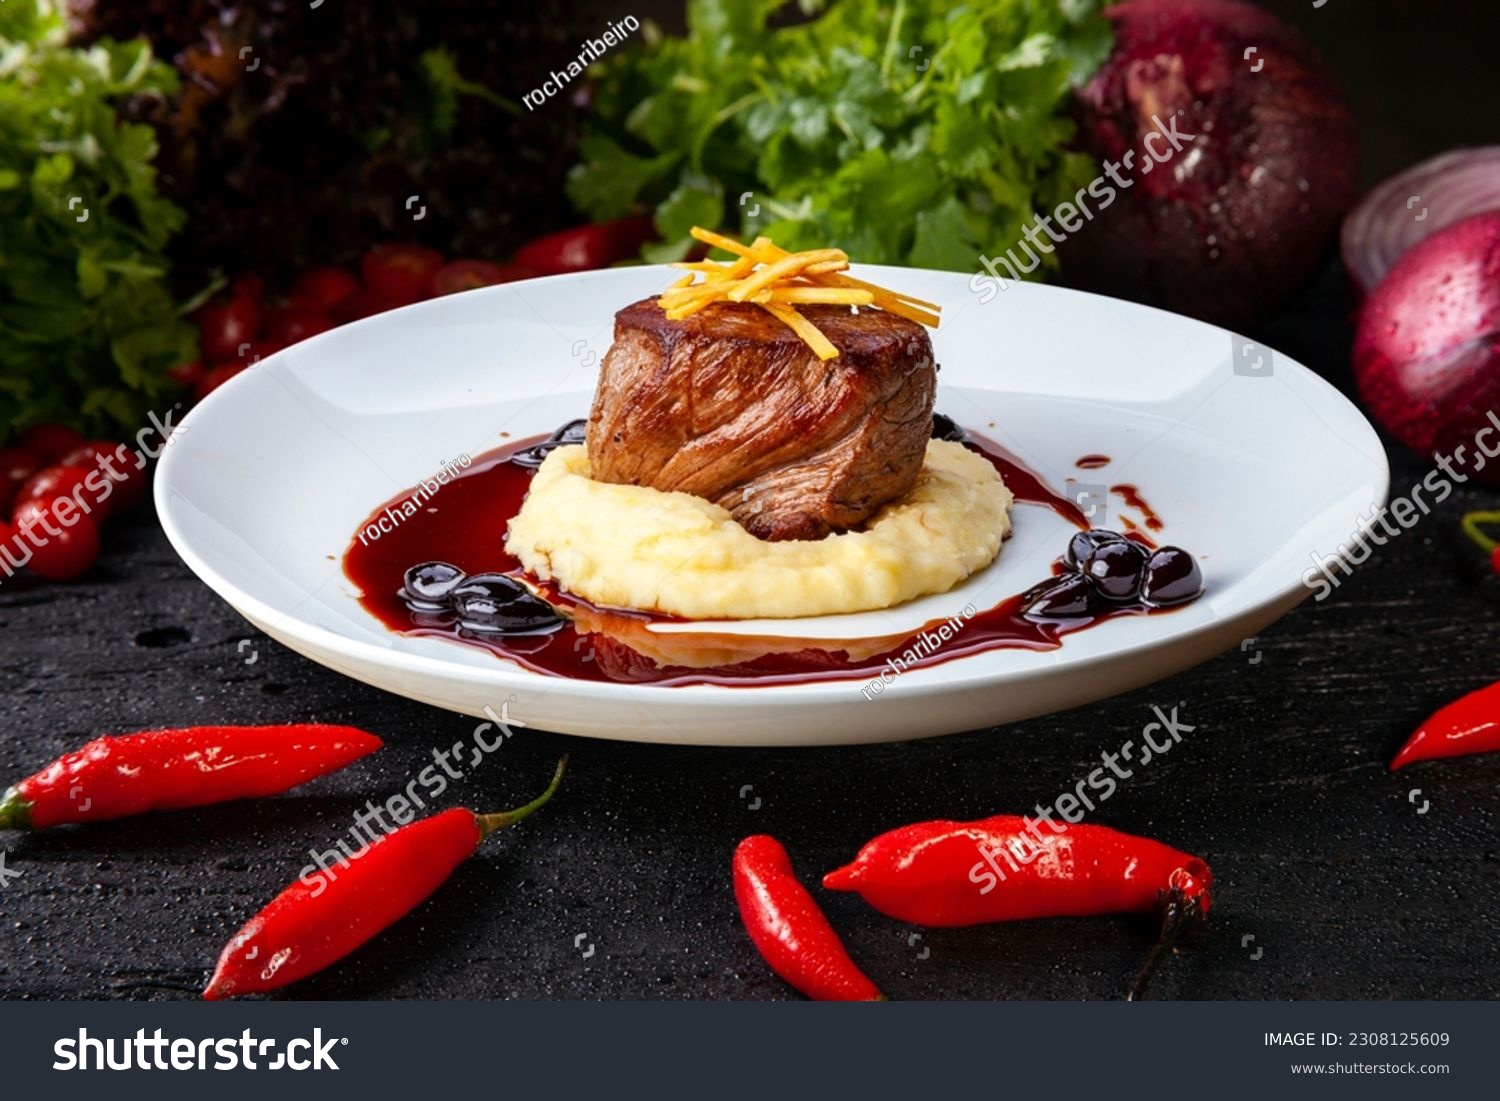 roasted and grilled steak with mashed potatoes, filet mignon #2308125609